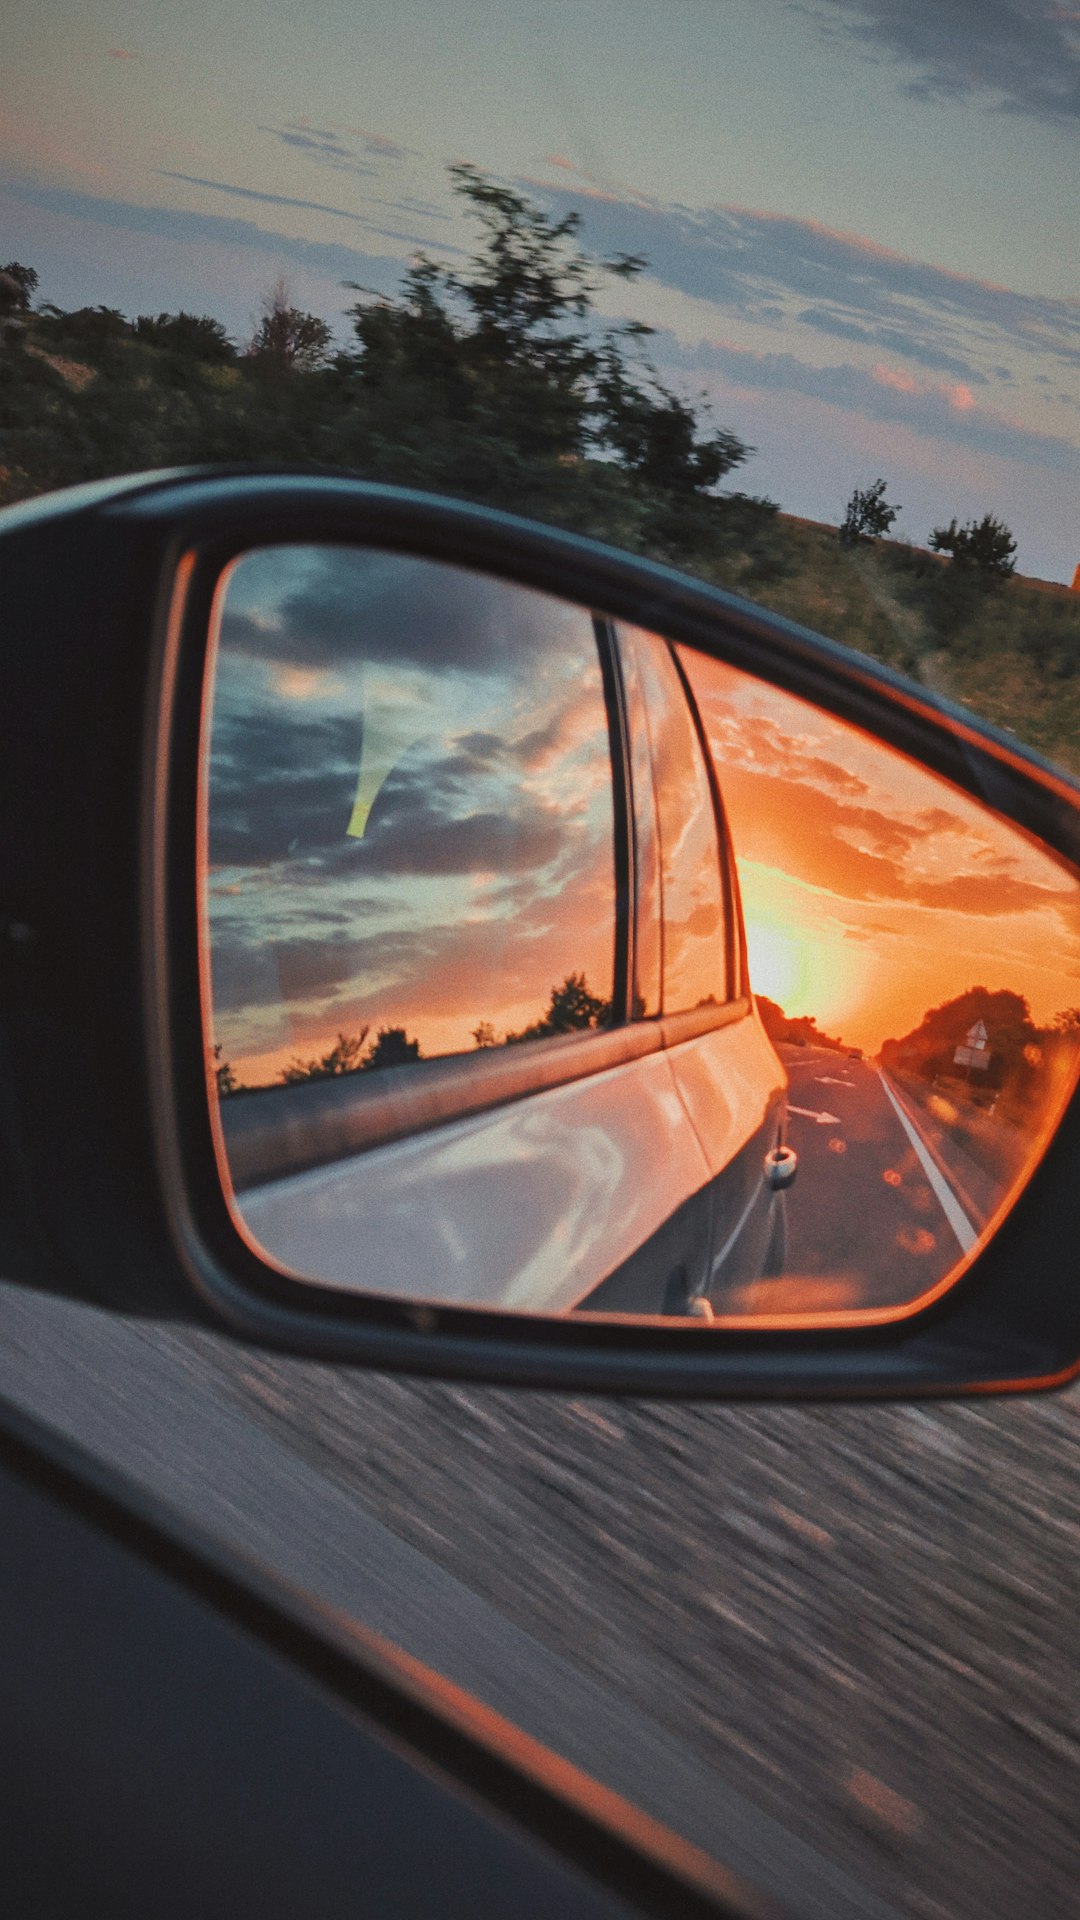 car side mirror showing sunset